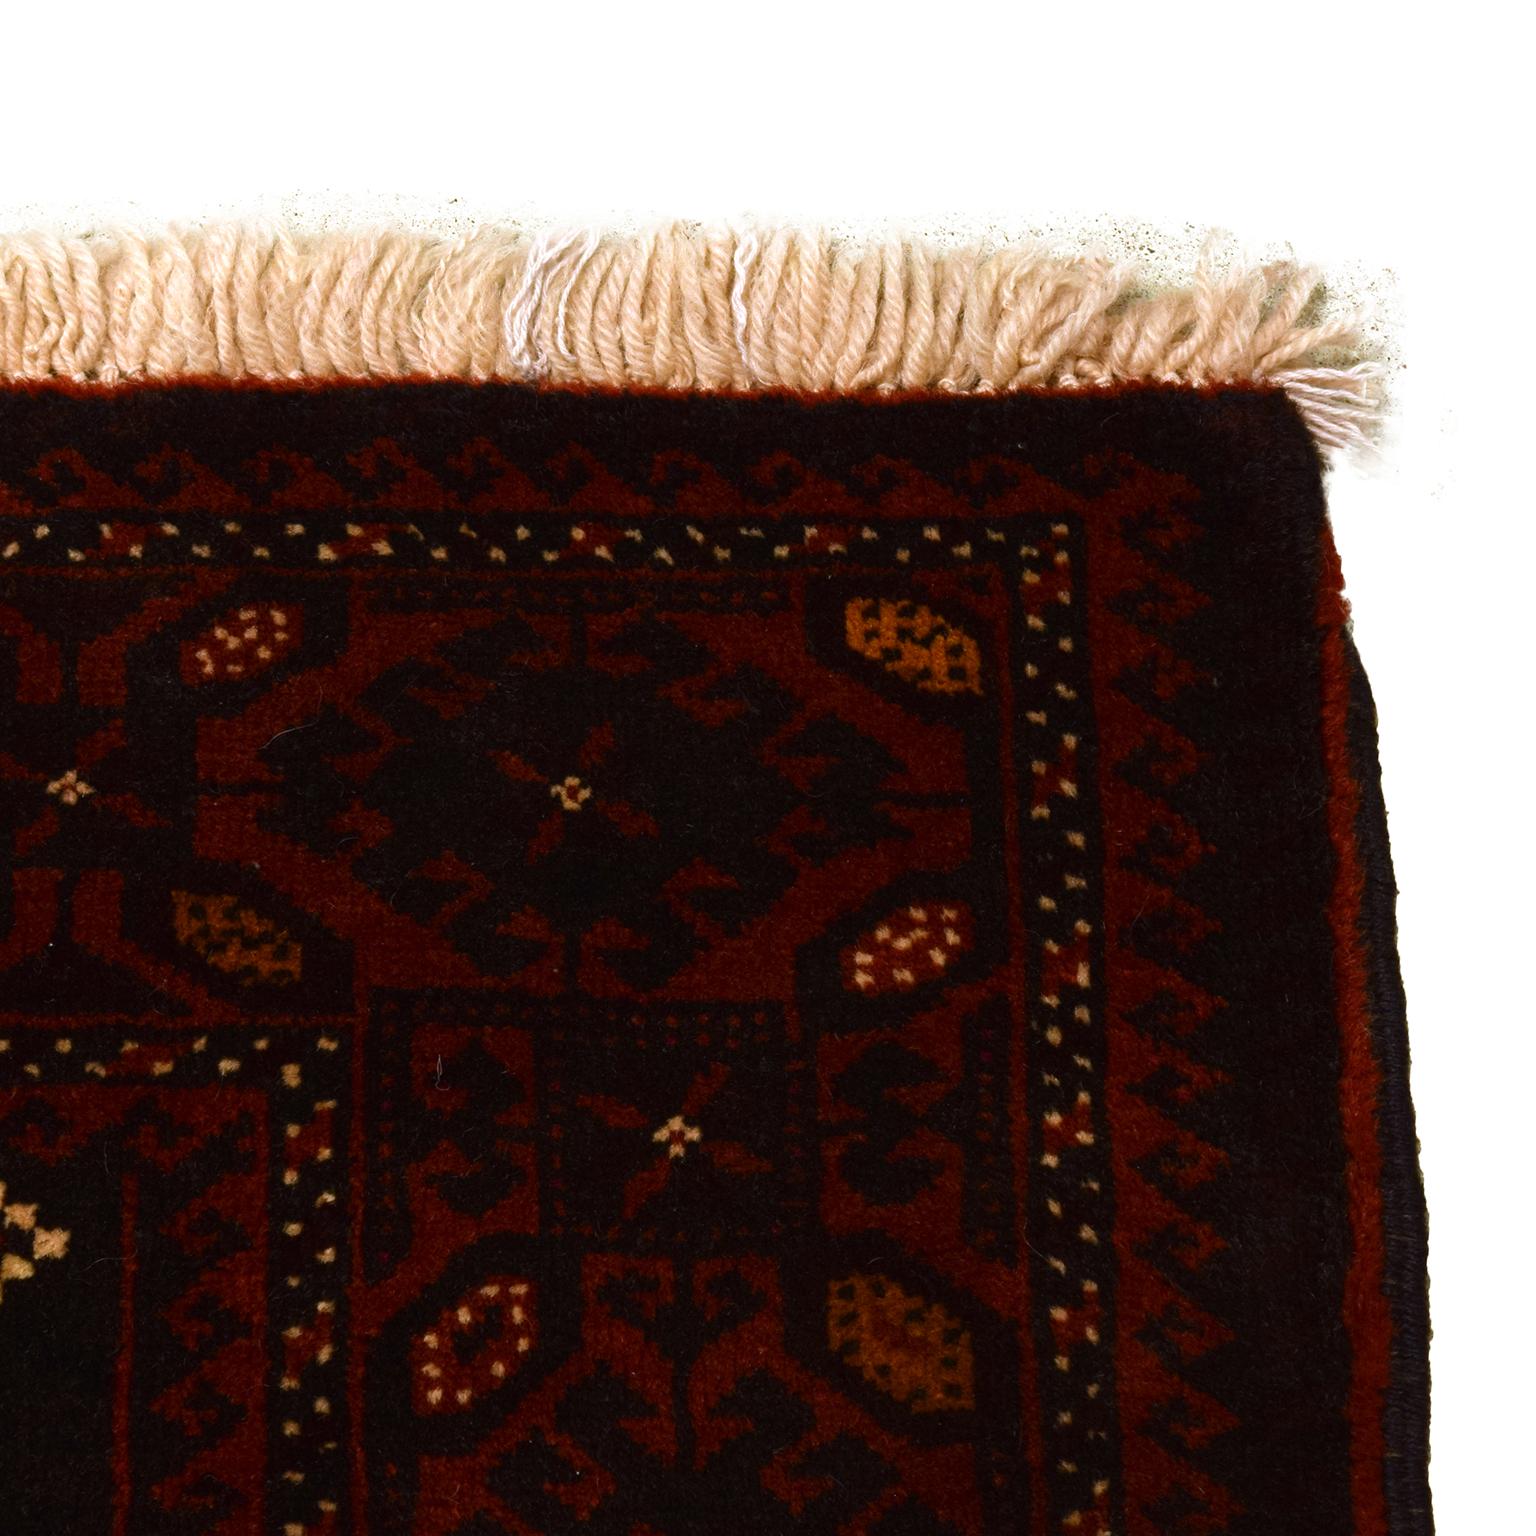 Traditional 1940s Wool Persian Balouchi Rug, 4' x 6' In Good Condition For Sale In New York, NY